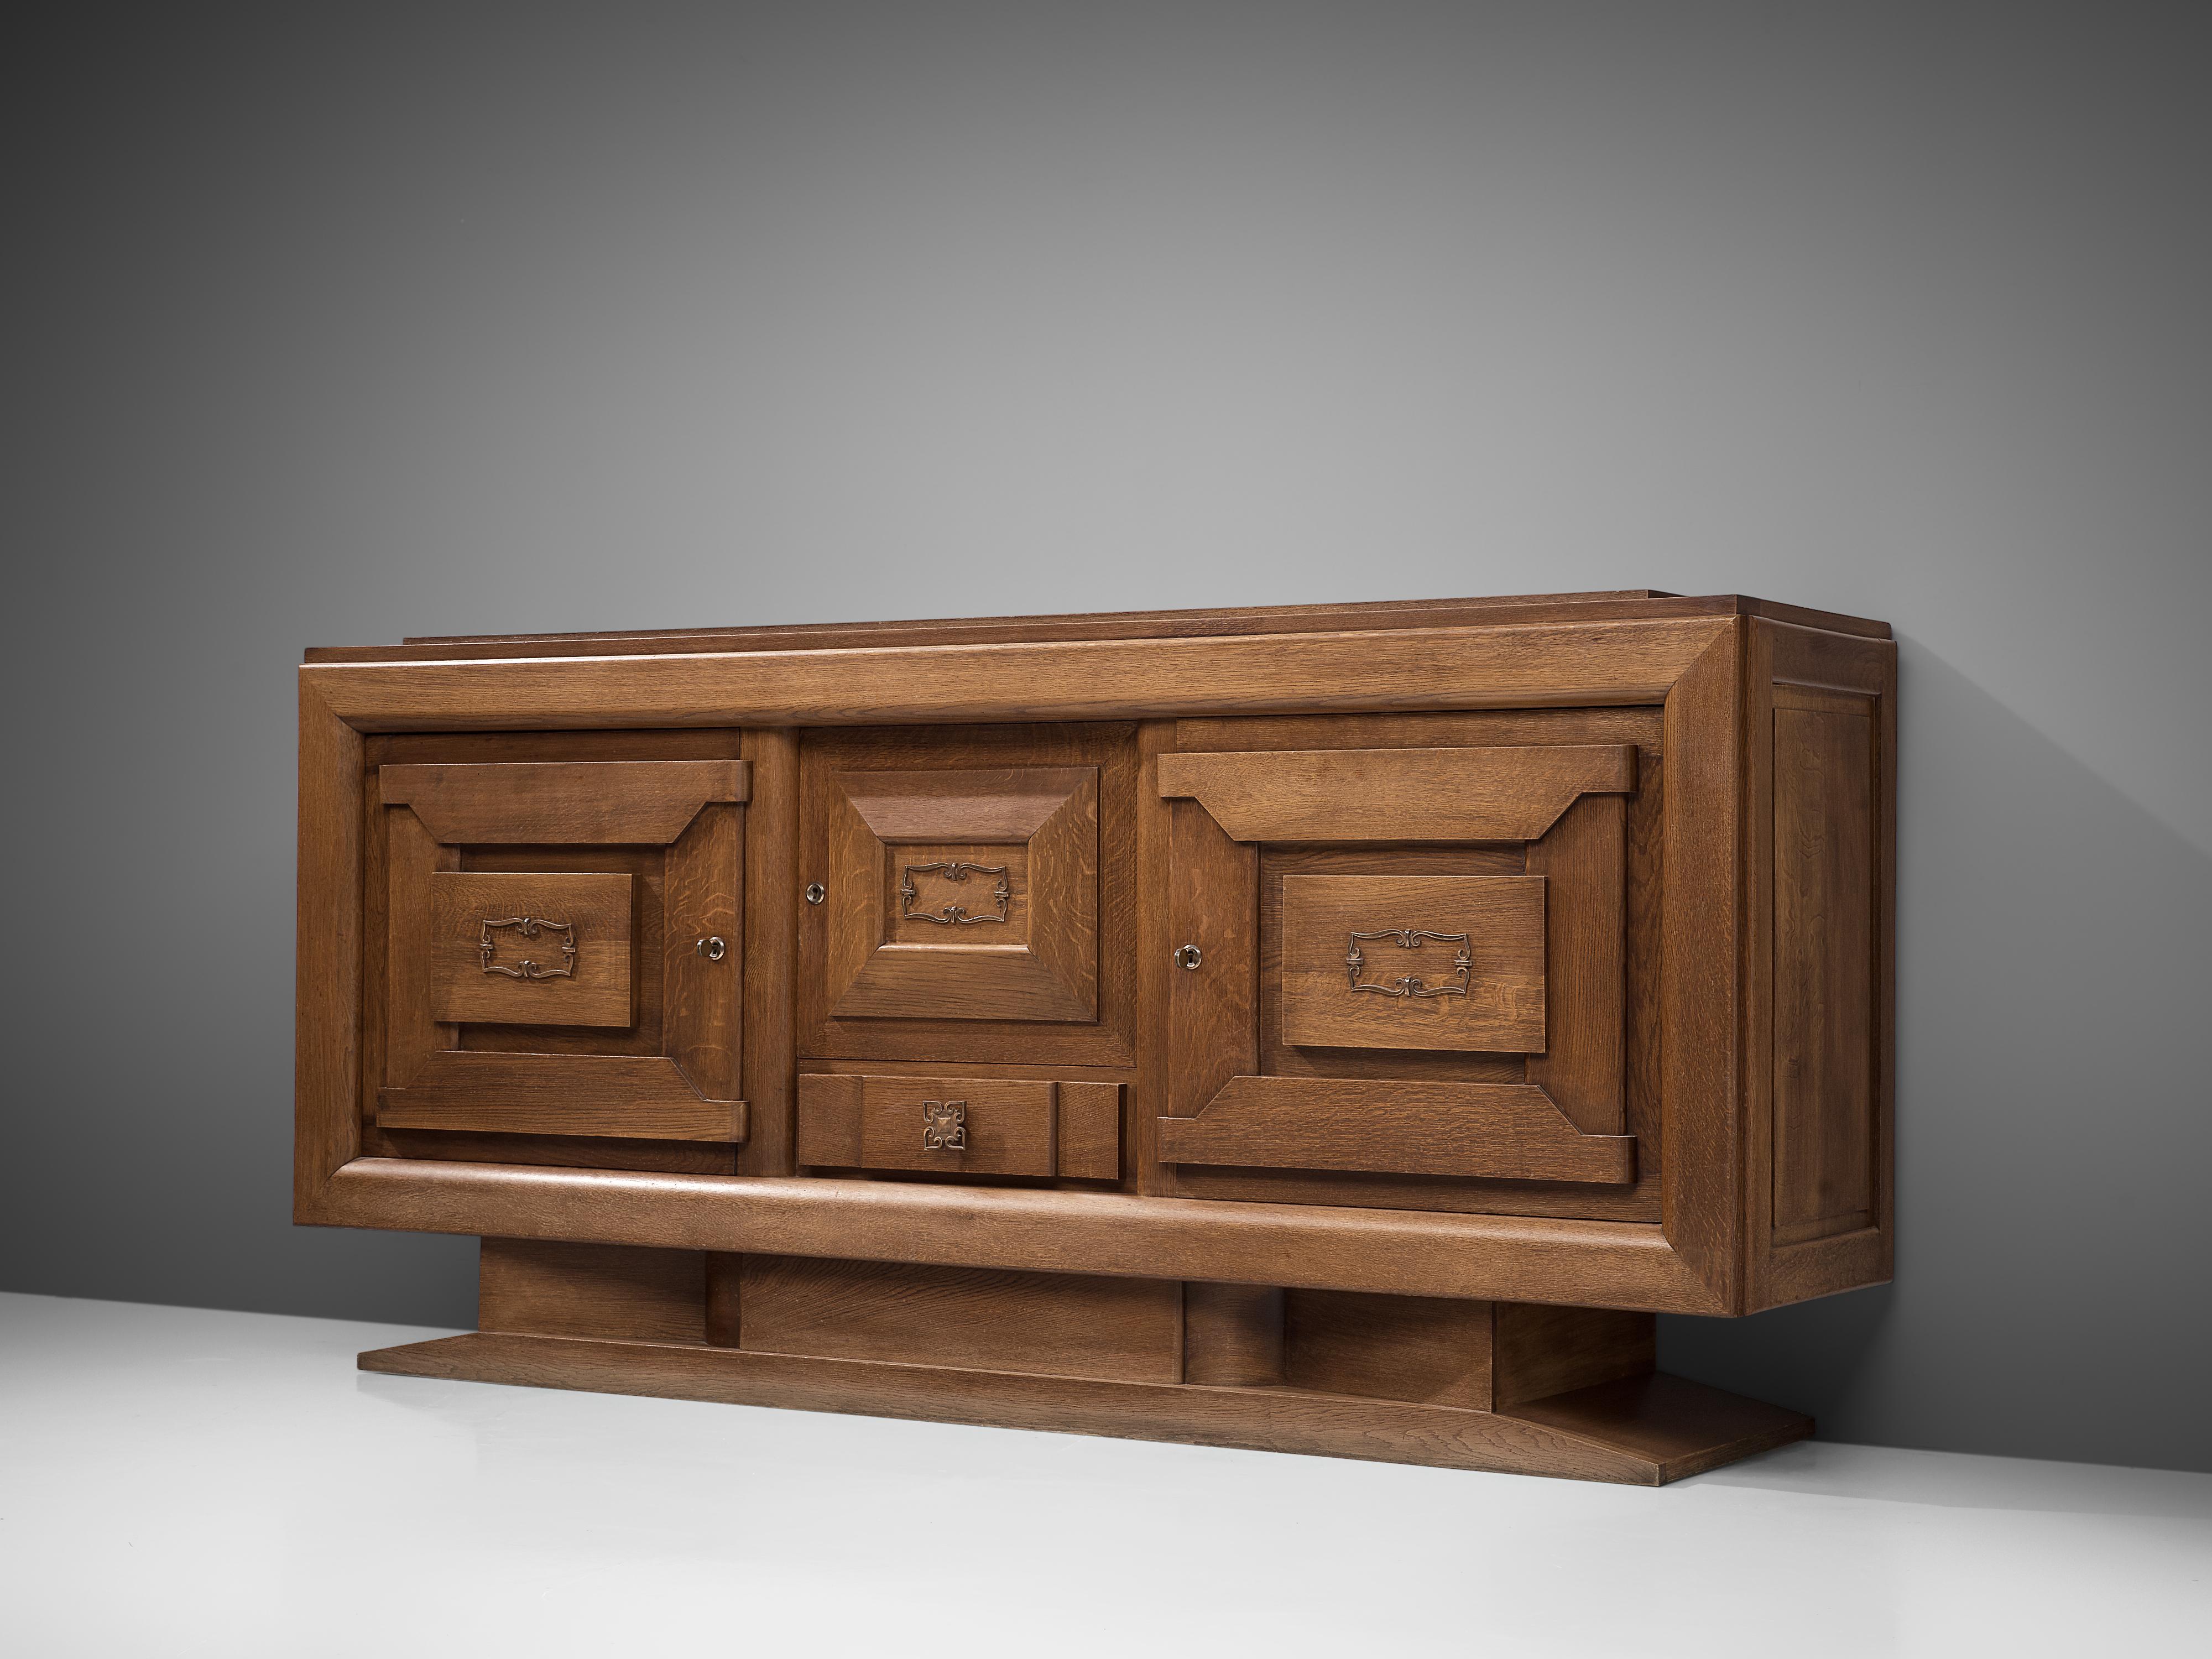 Charles Dudouyt, sideboard, oak, France, 1930s

French Art Deco credenza designed by the decorator Charles Dudouyt. The solid wooden frame gives this sideboard a sturdy character. The door panels show a geometric pattern of solid natural wooden